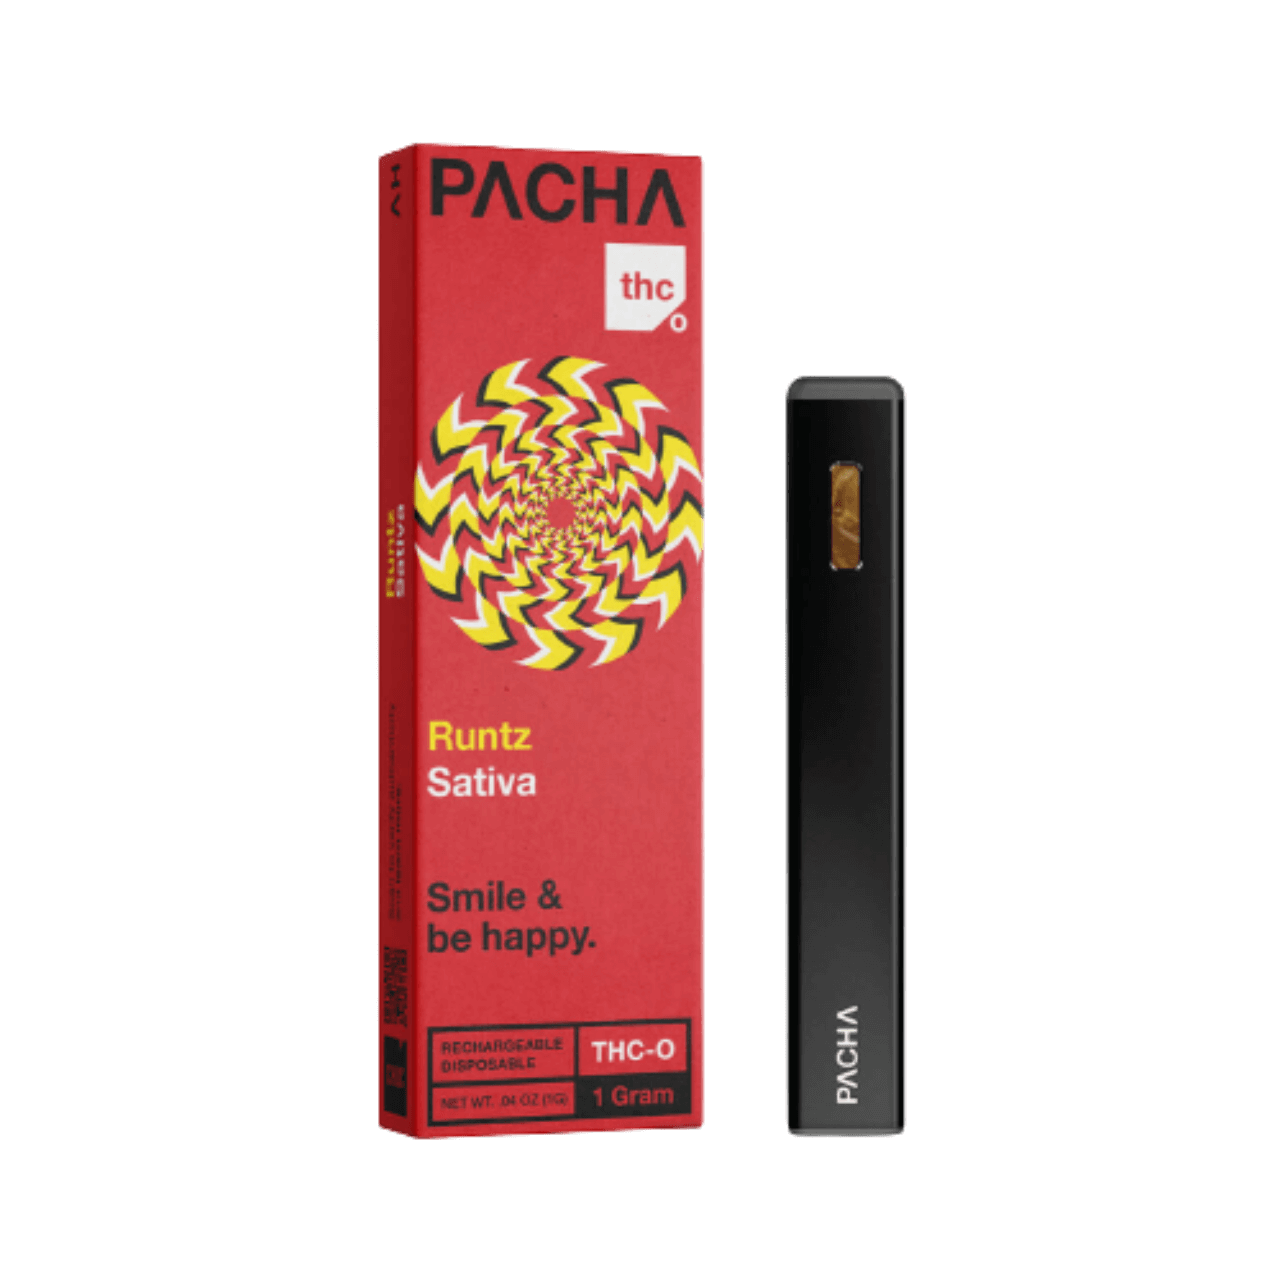 Pacha THC-O 1G Rechargeable Disposable Device